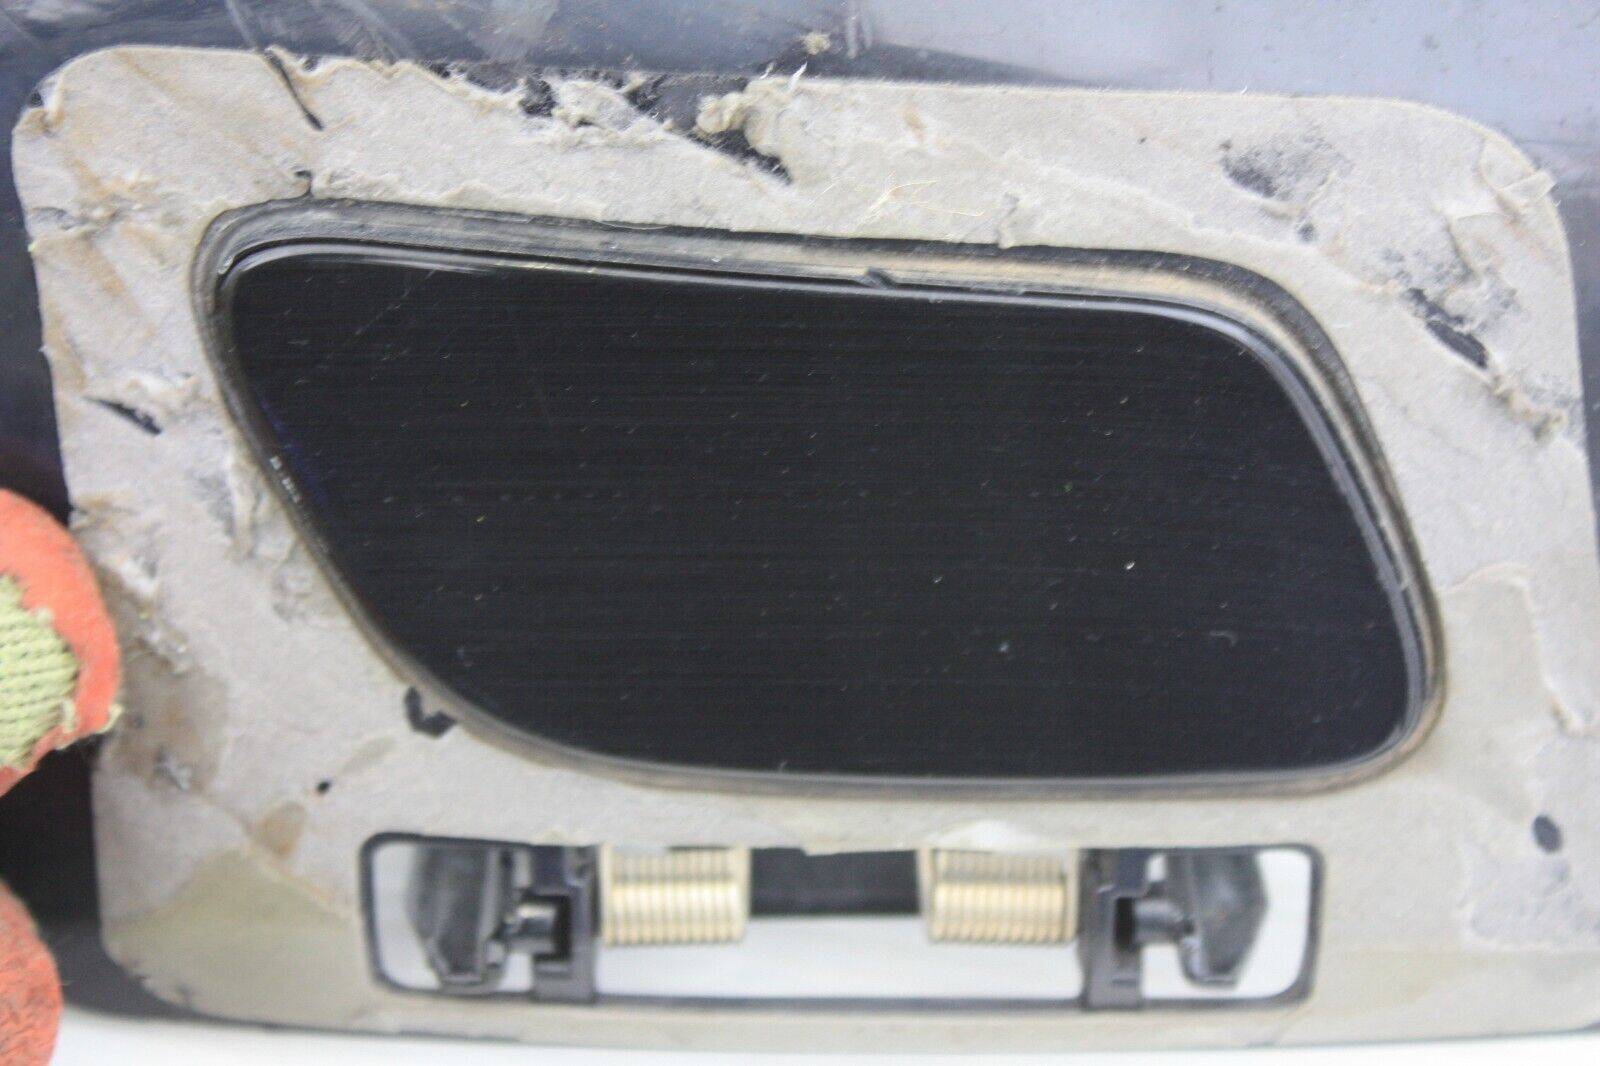 Mercedes-GLA-X156-Front-Right-Side-Headlight-Washer-Cap-2014-TO-2017-A1568852456-175908580942-2